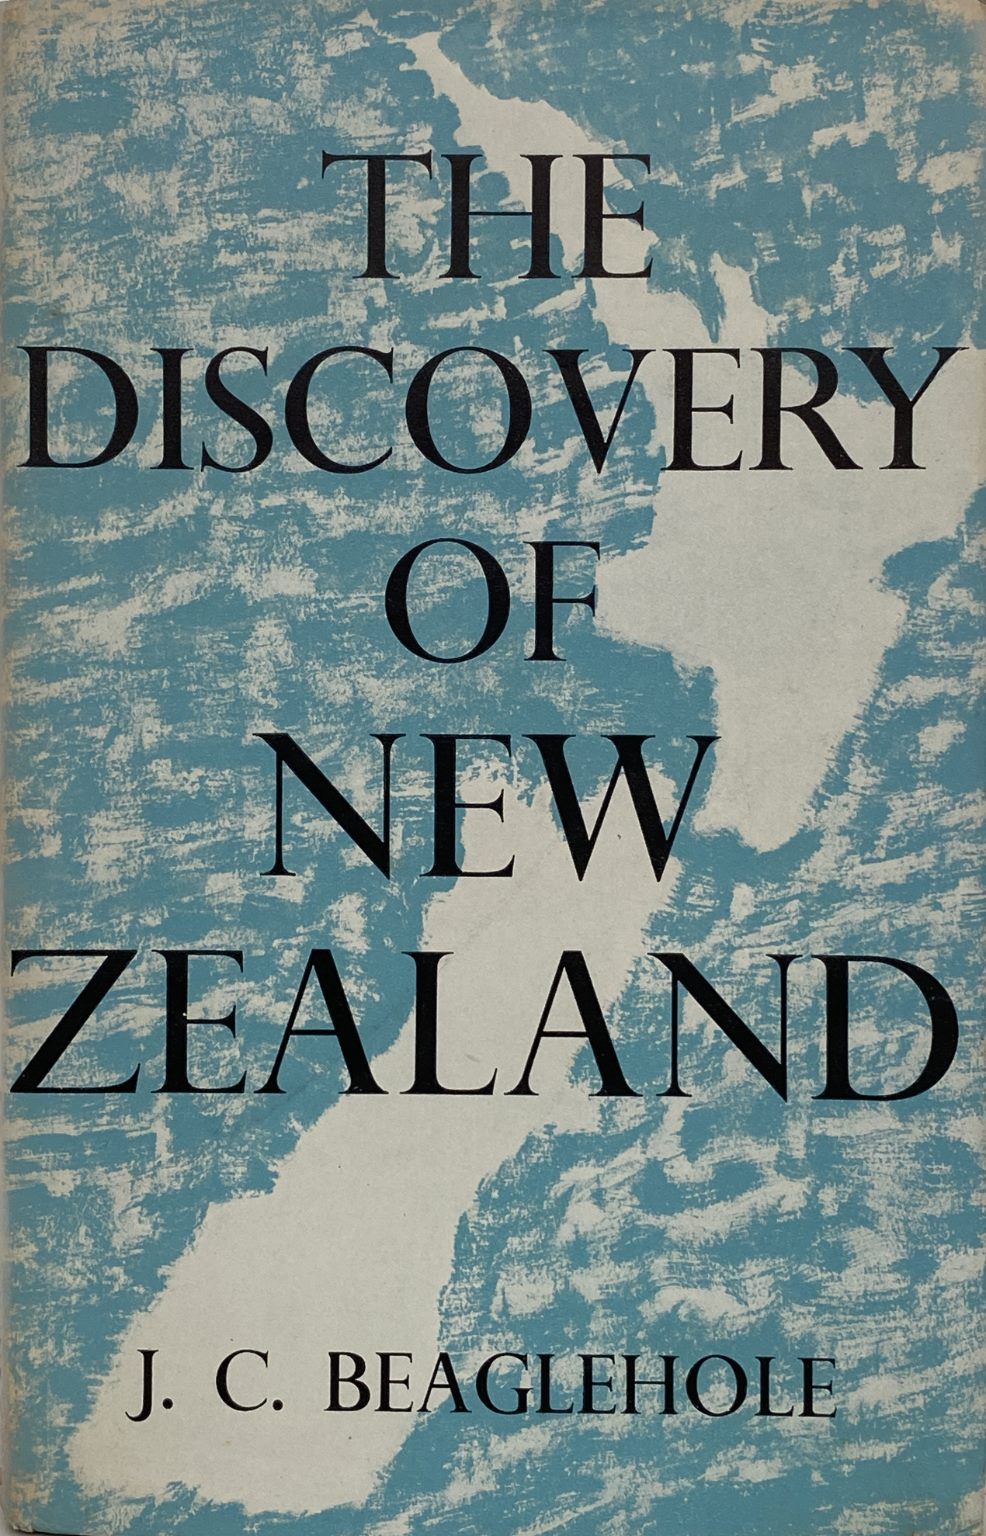 THE DISCOVERY OF NEW ZEALAND